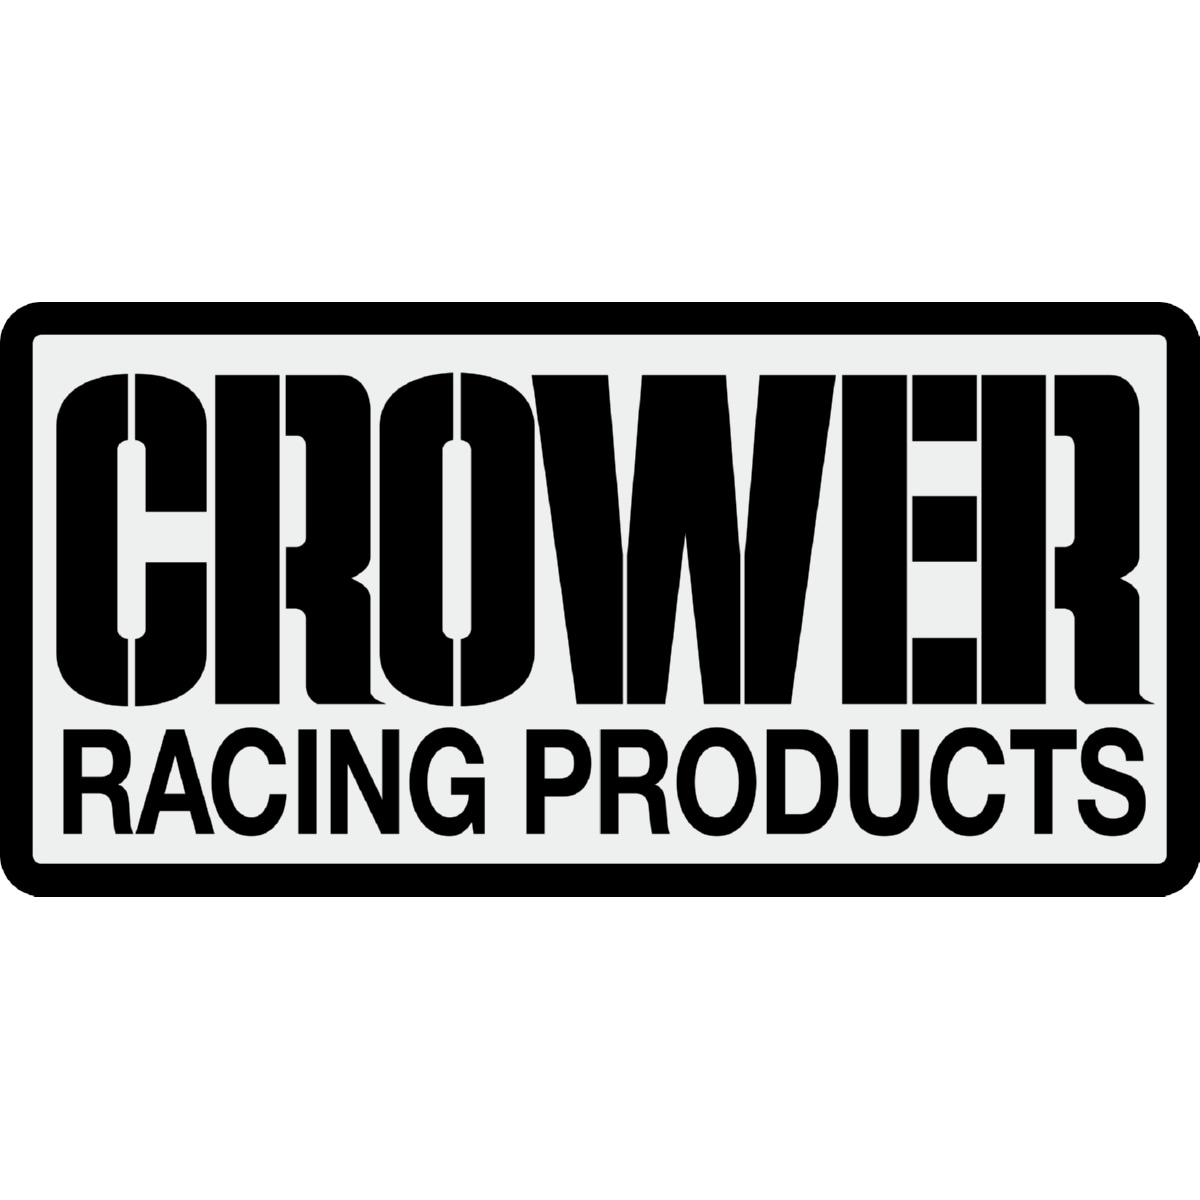 Crower